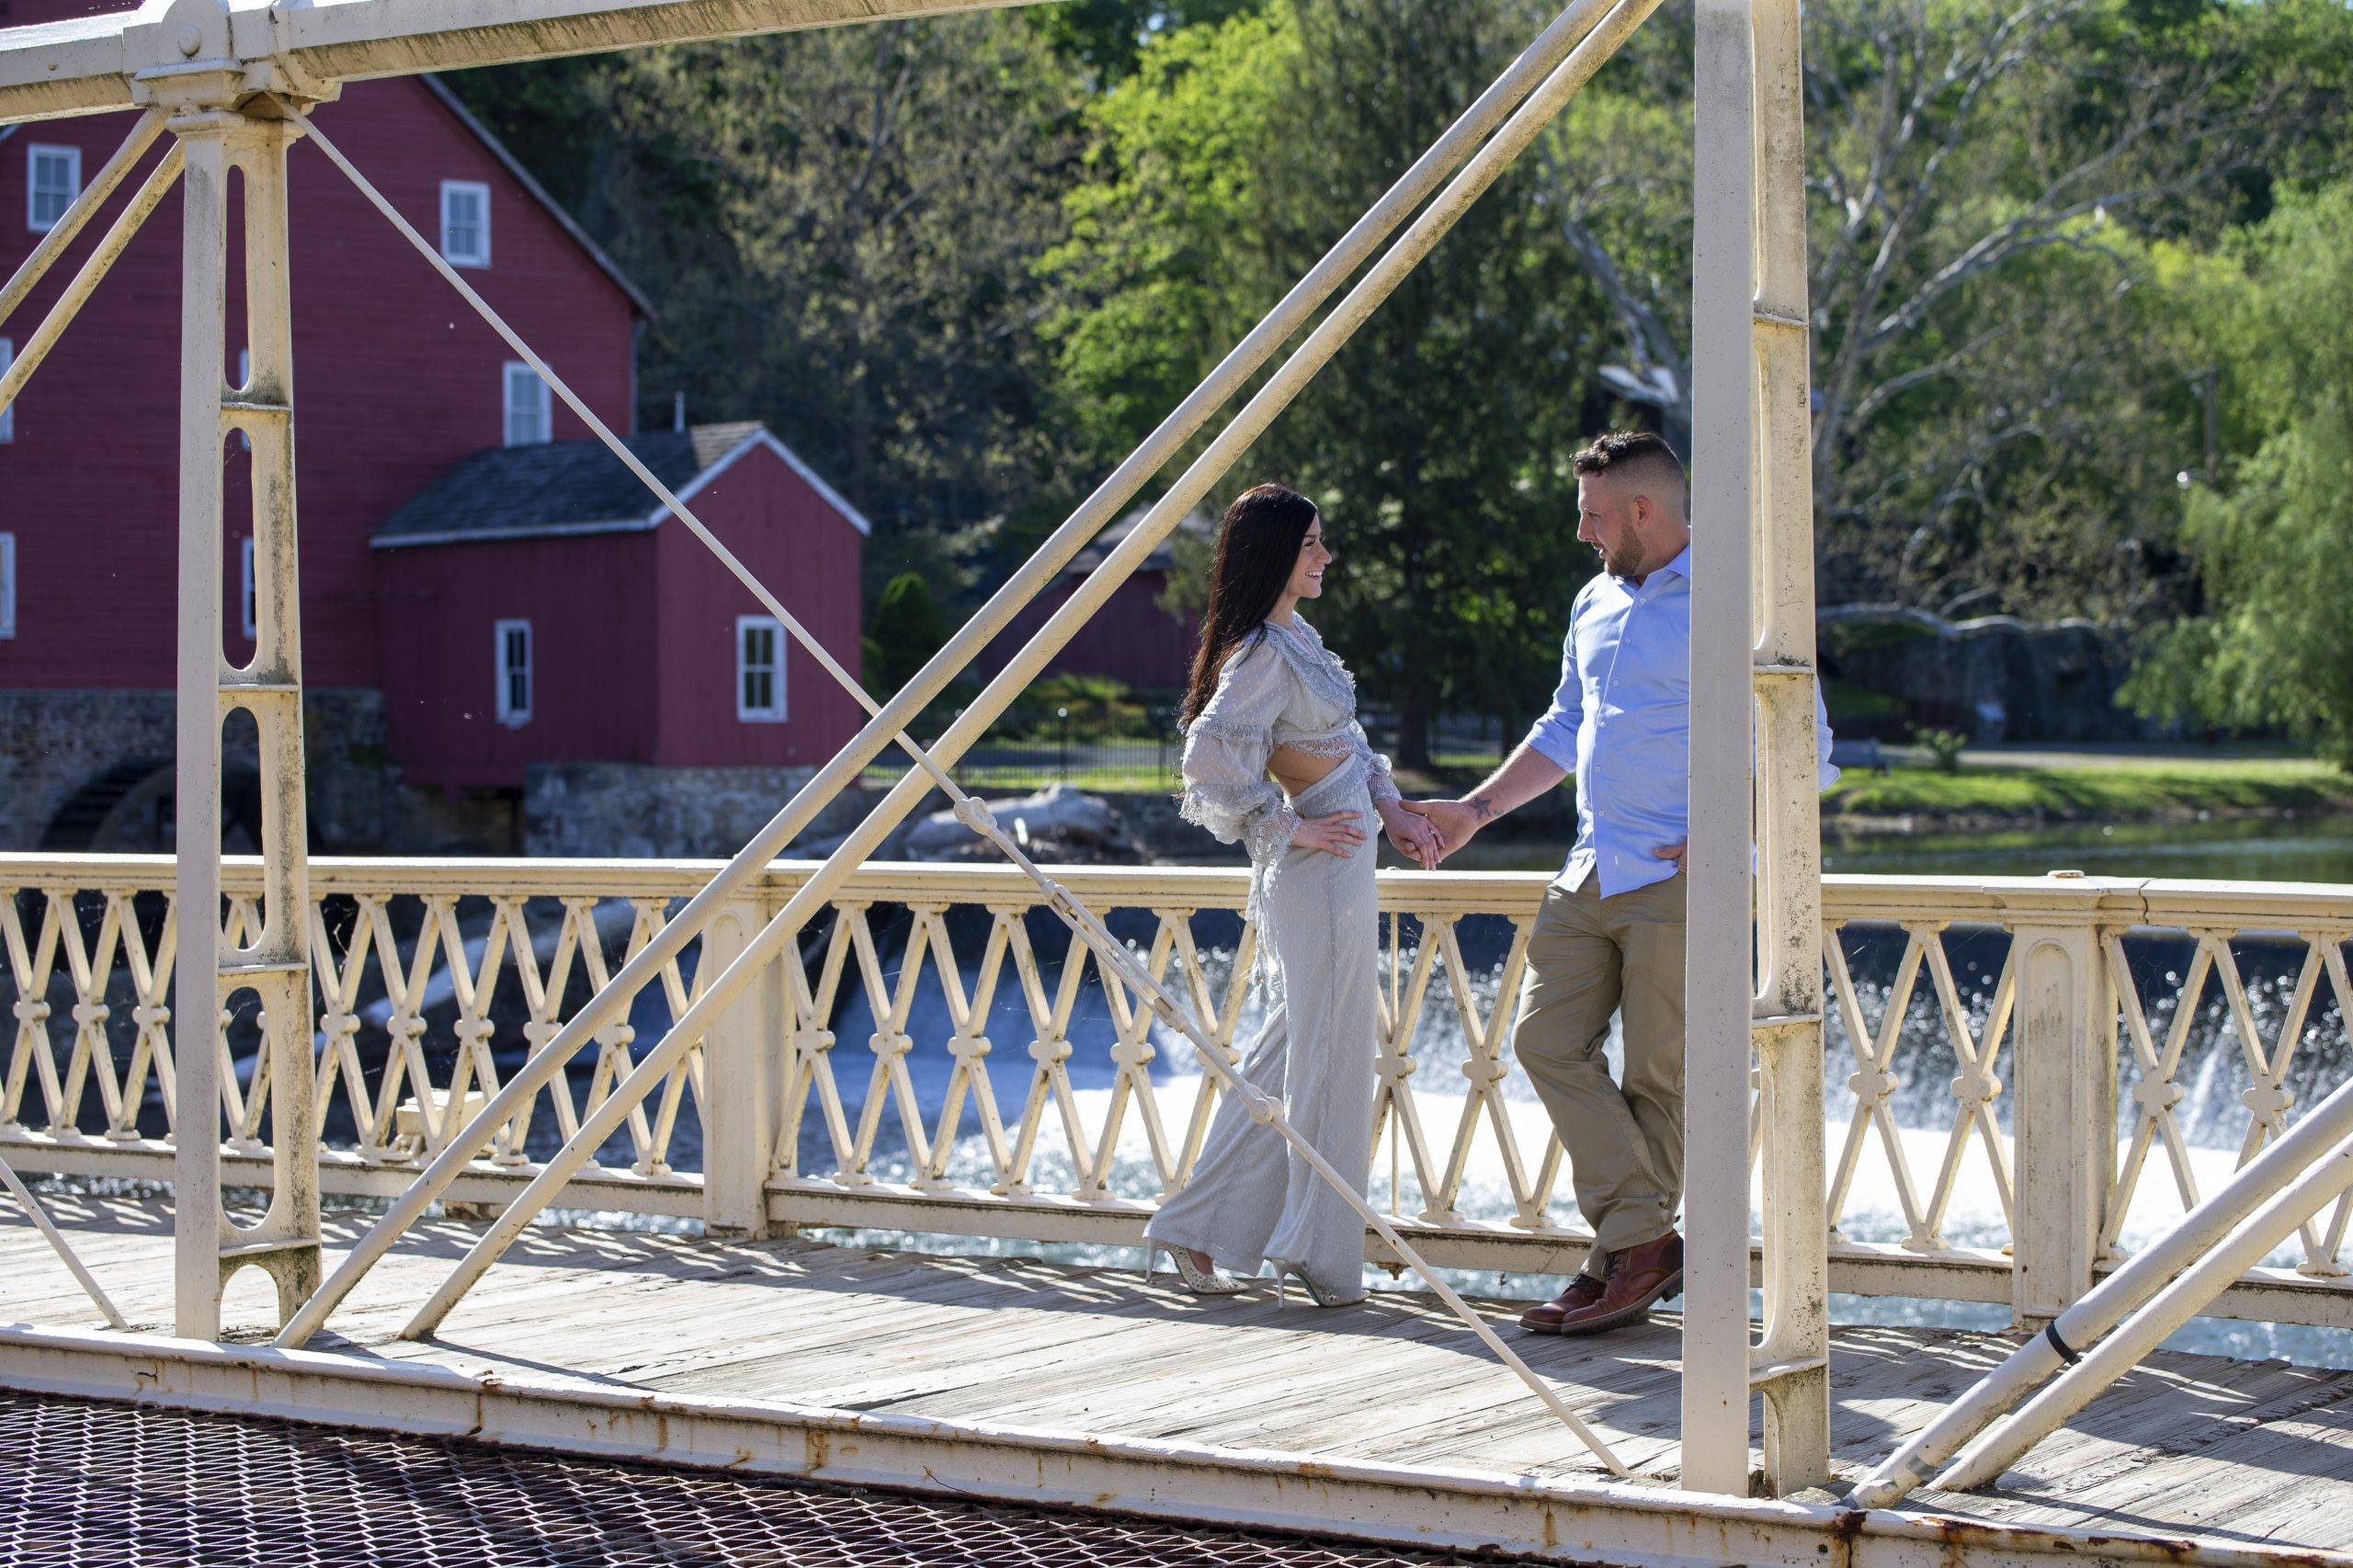 An engaged couple standing on a bridge over a river.